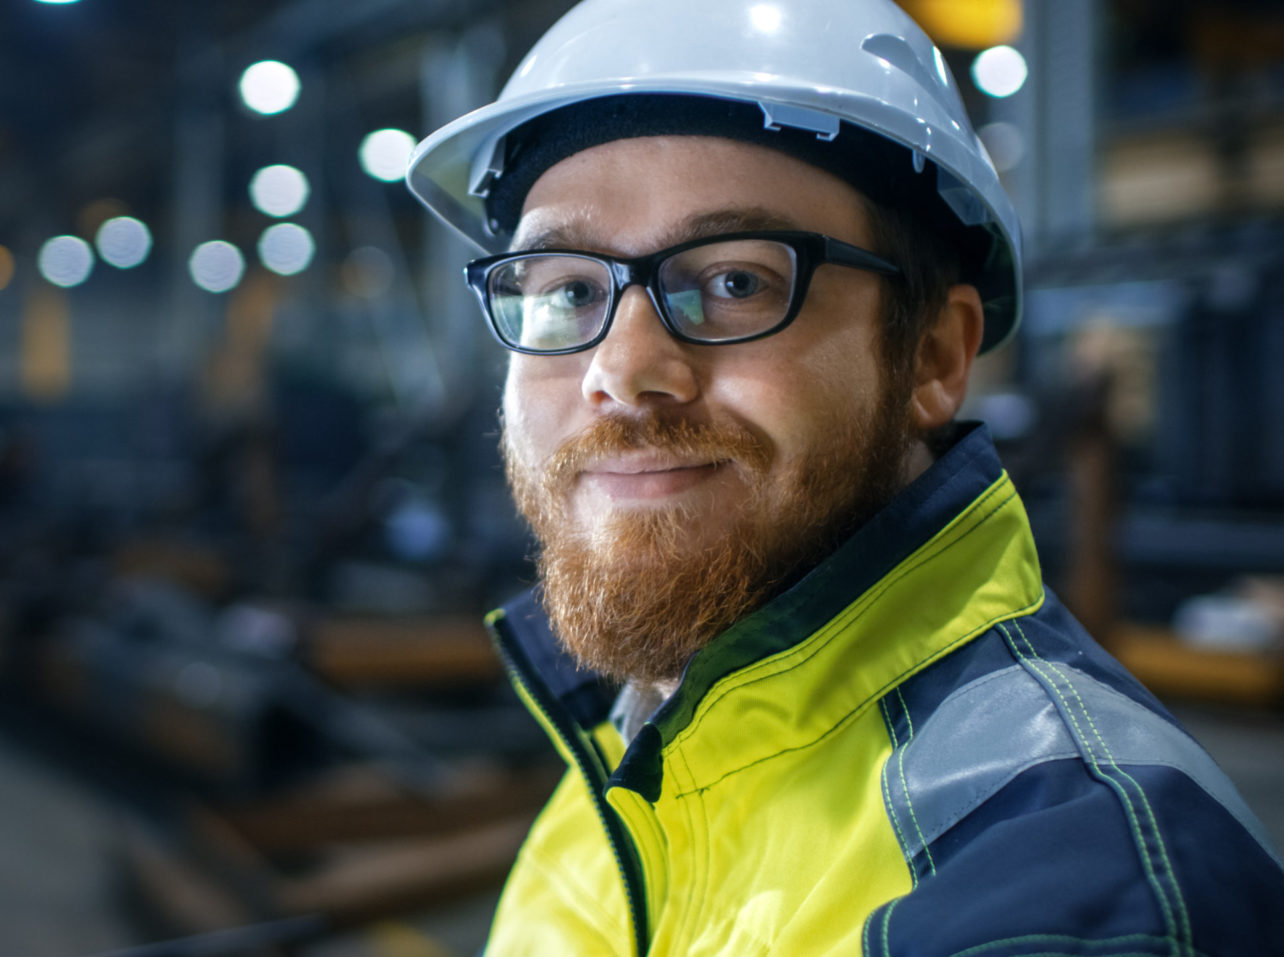 Man with safety gear smiling at camera